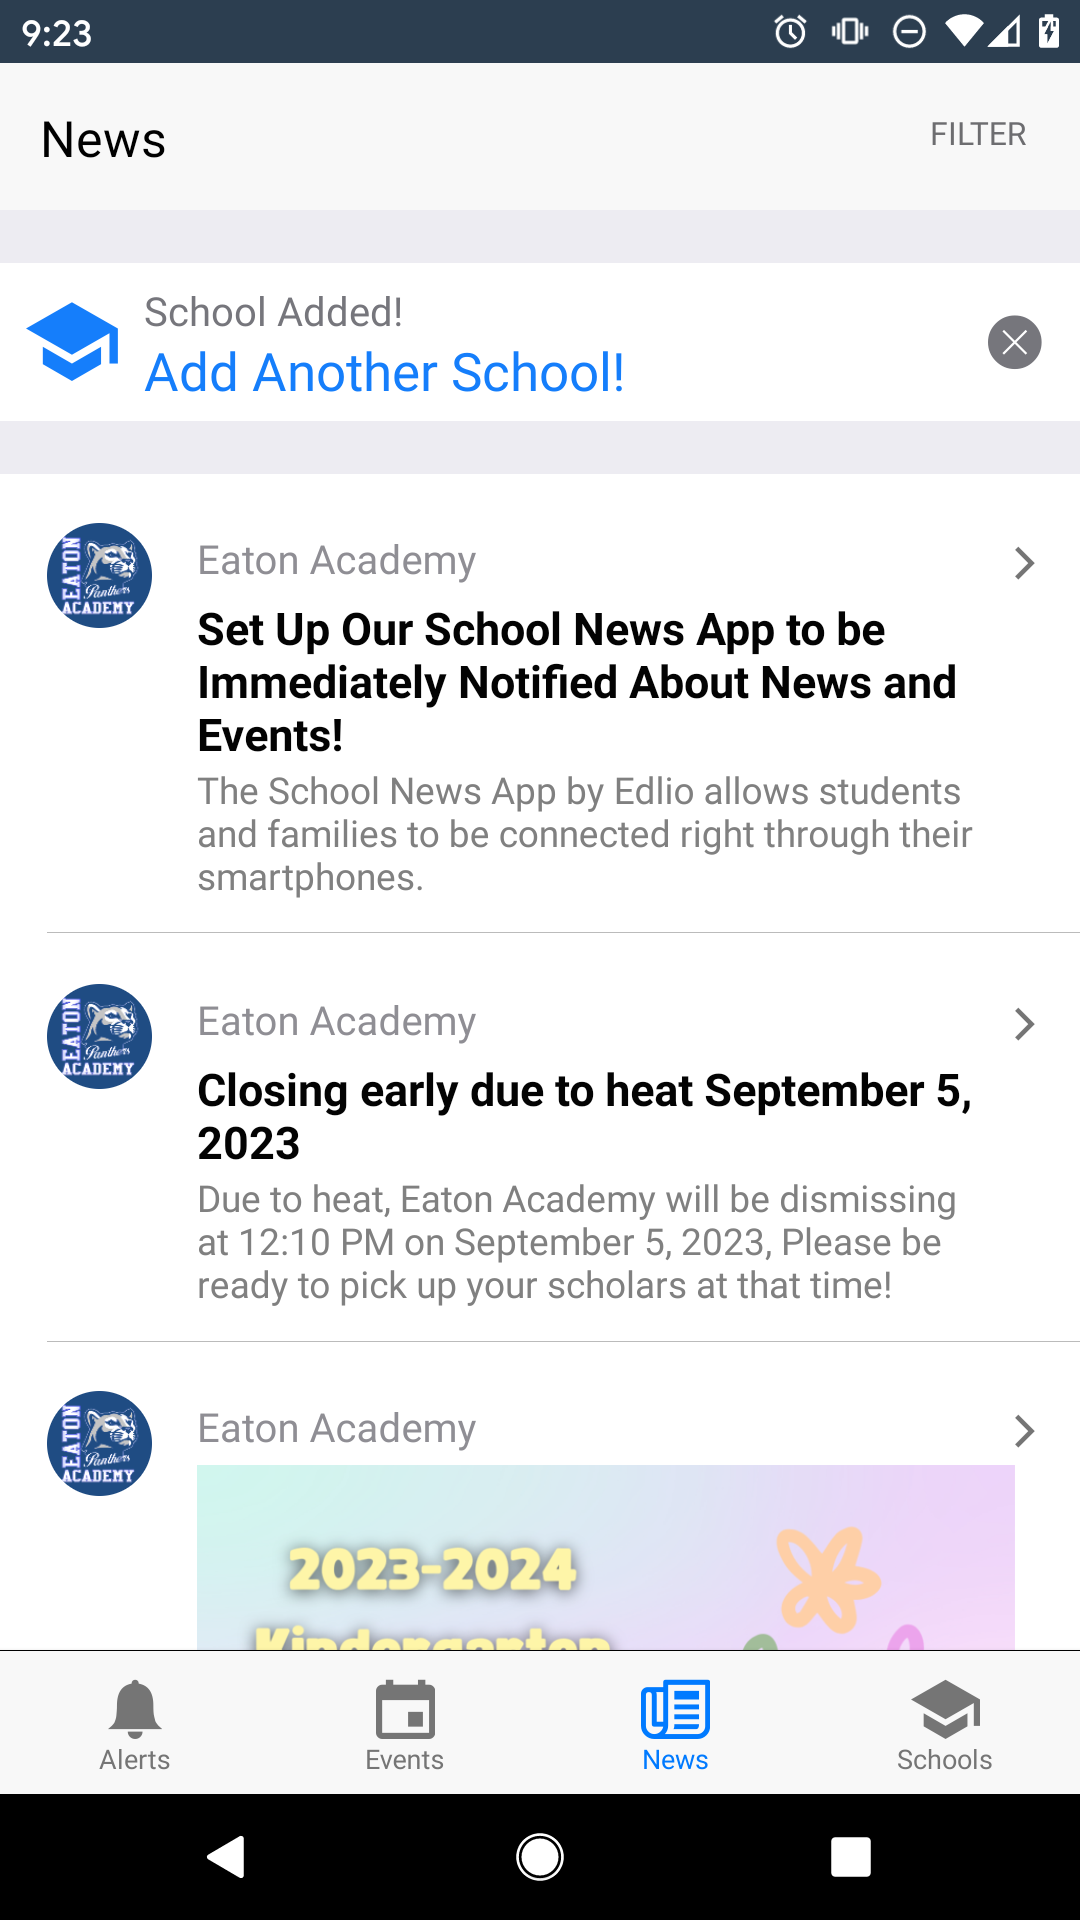 News from Eaton Academy